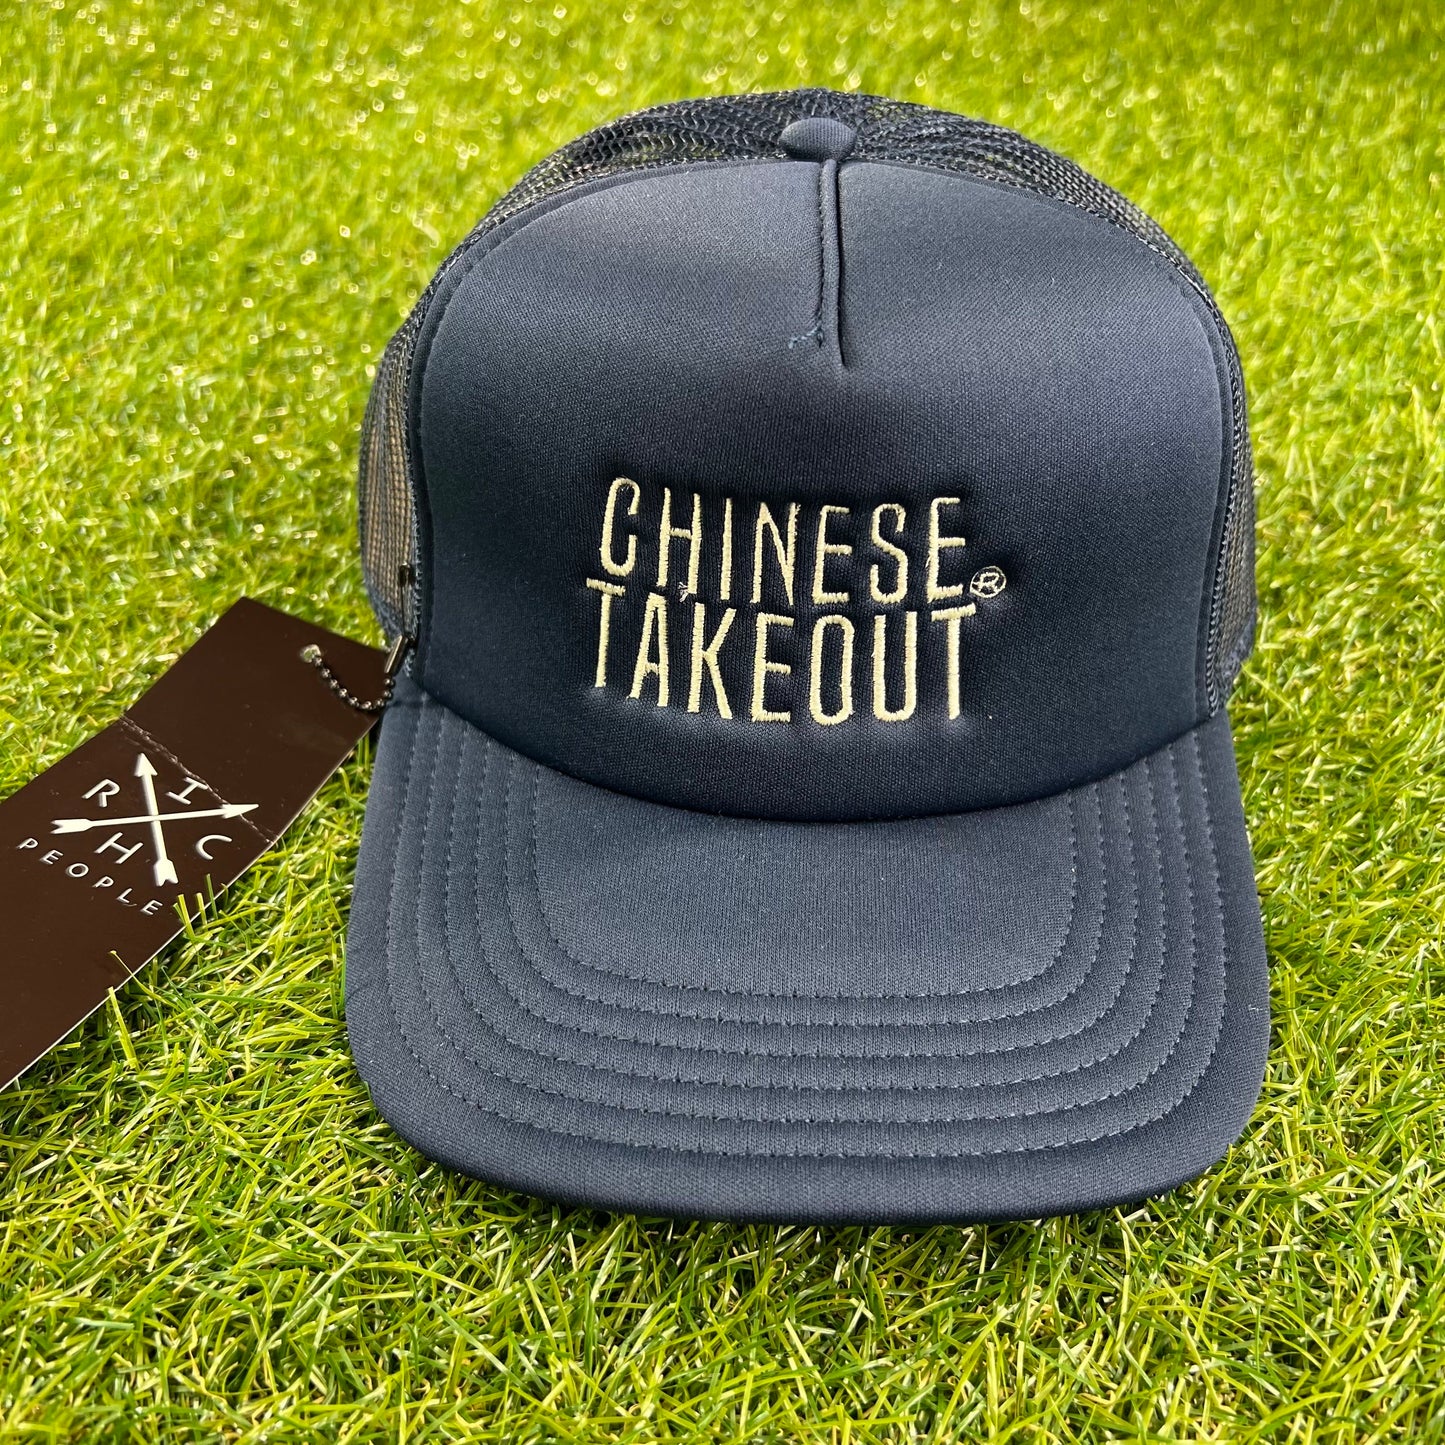  Hats, Blue Hats, Trucker, Style, Snapback, Men, Boys, Teens, Gifts, Hat, Nix Smith Co, Urban, Wmns, Girls,  Hat, Navy and White Hat, Fitted Hats, Fashion, Chinese Takeout